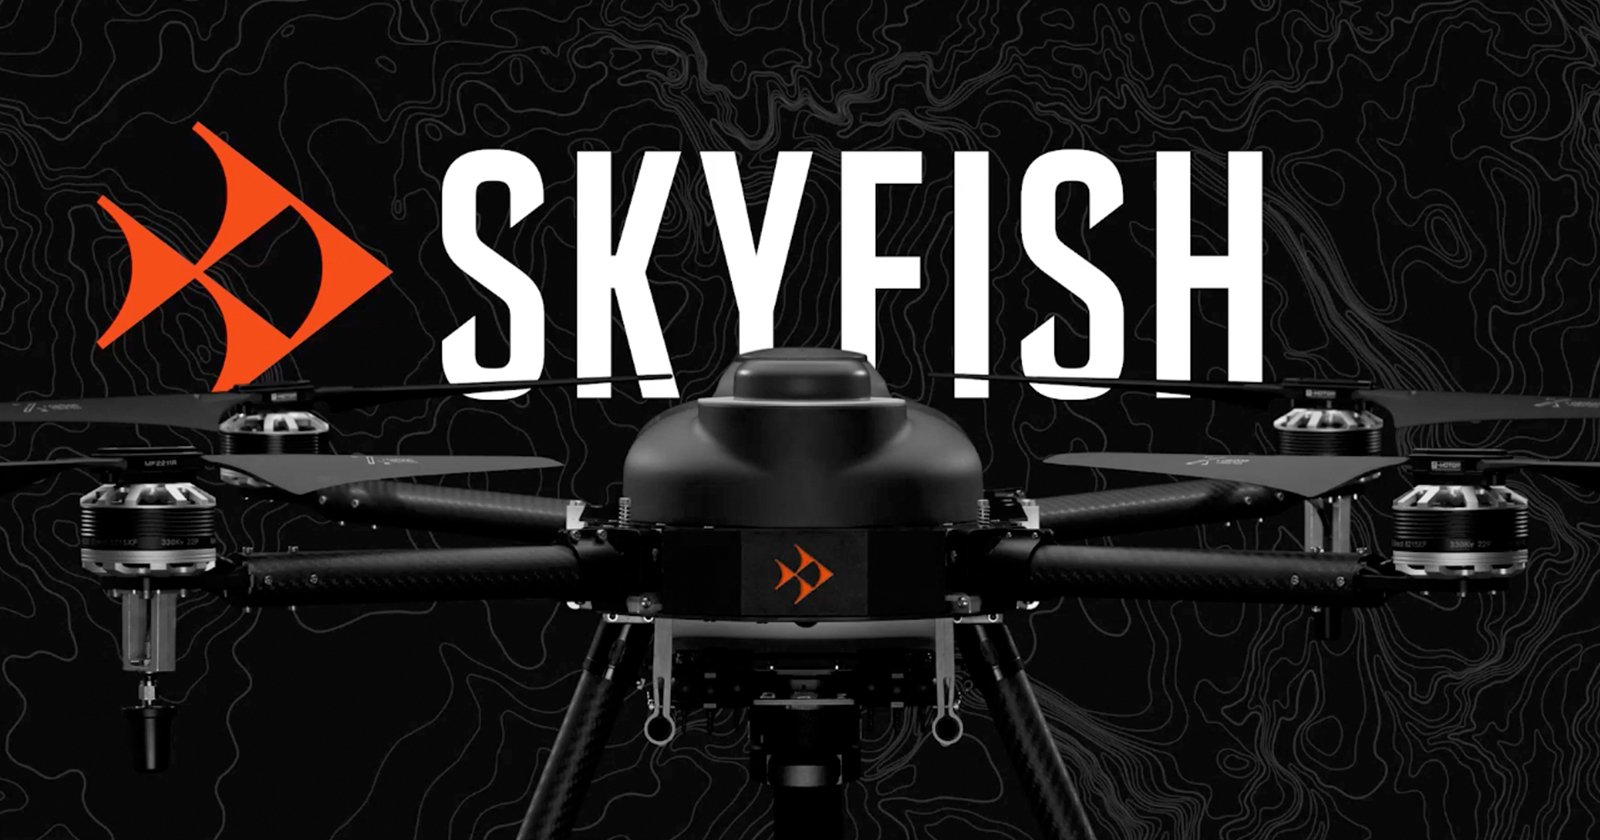 Skyfish Uses Sony Mirrorless Cameras For 3D Models of Large Structures